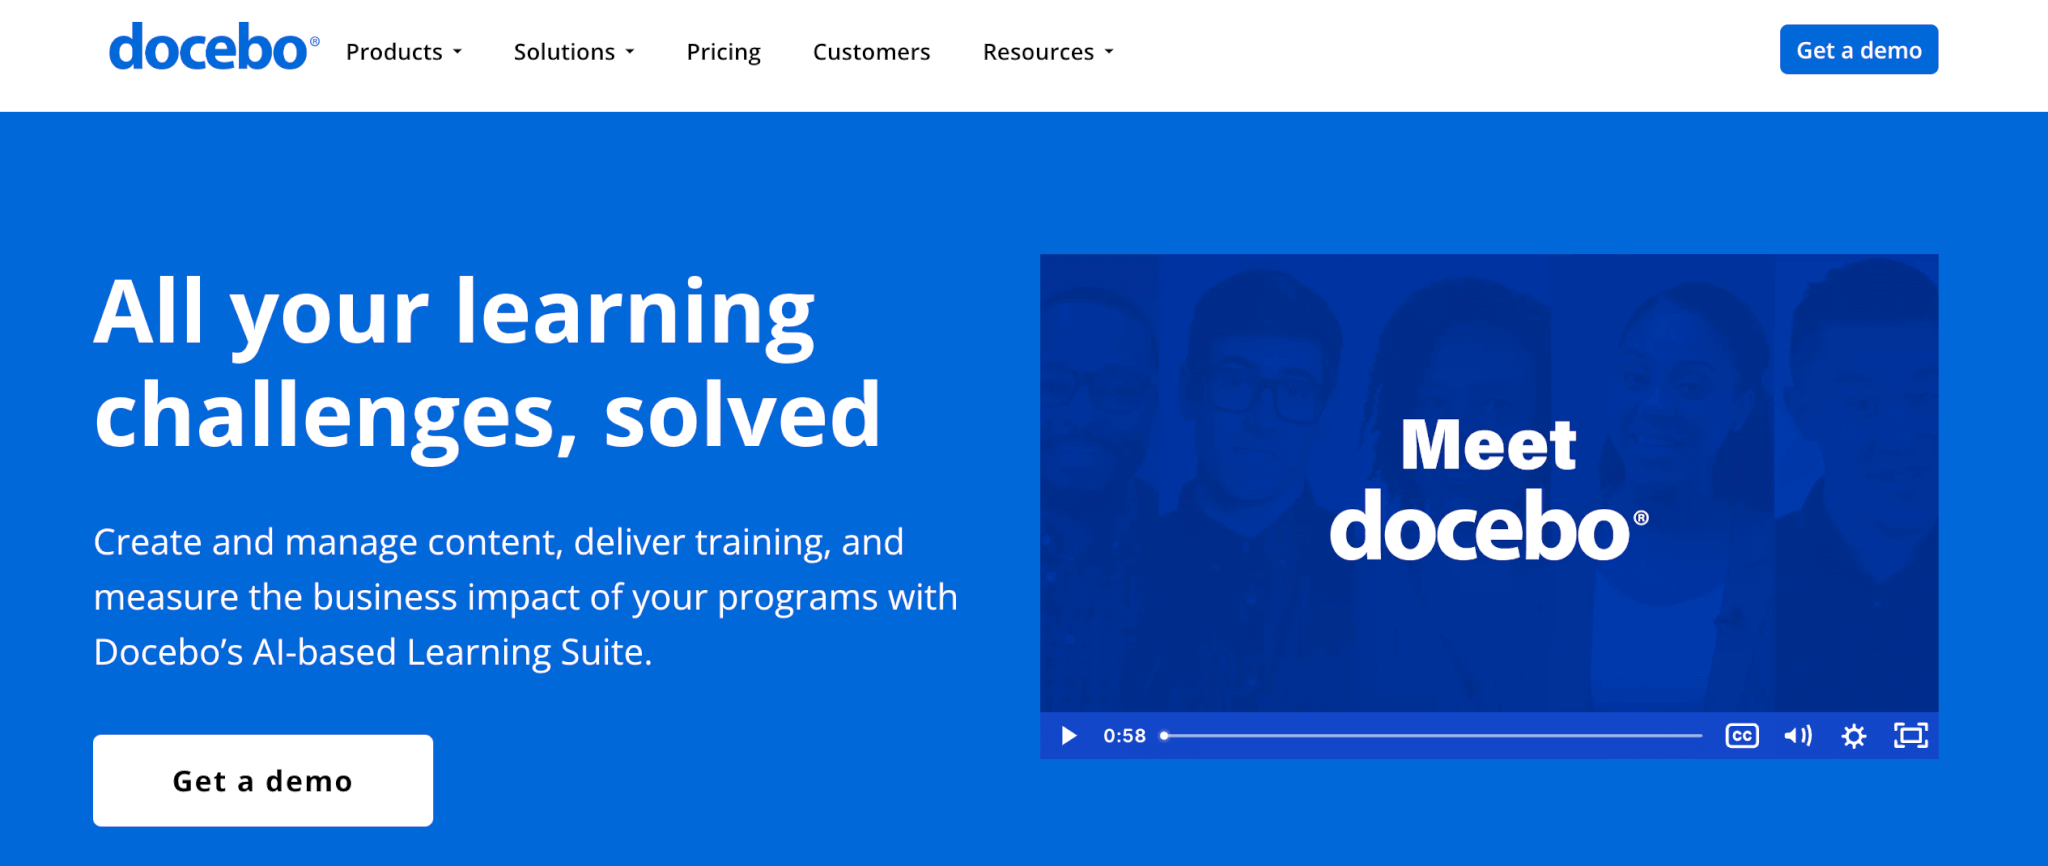 image of Docebo landing page in blue font describing the platform's key features